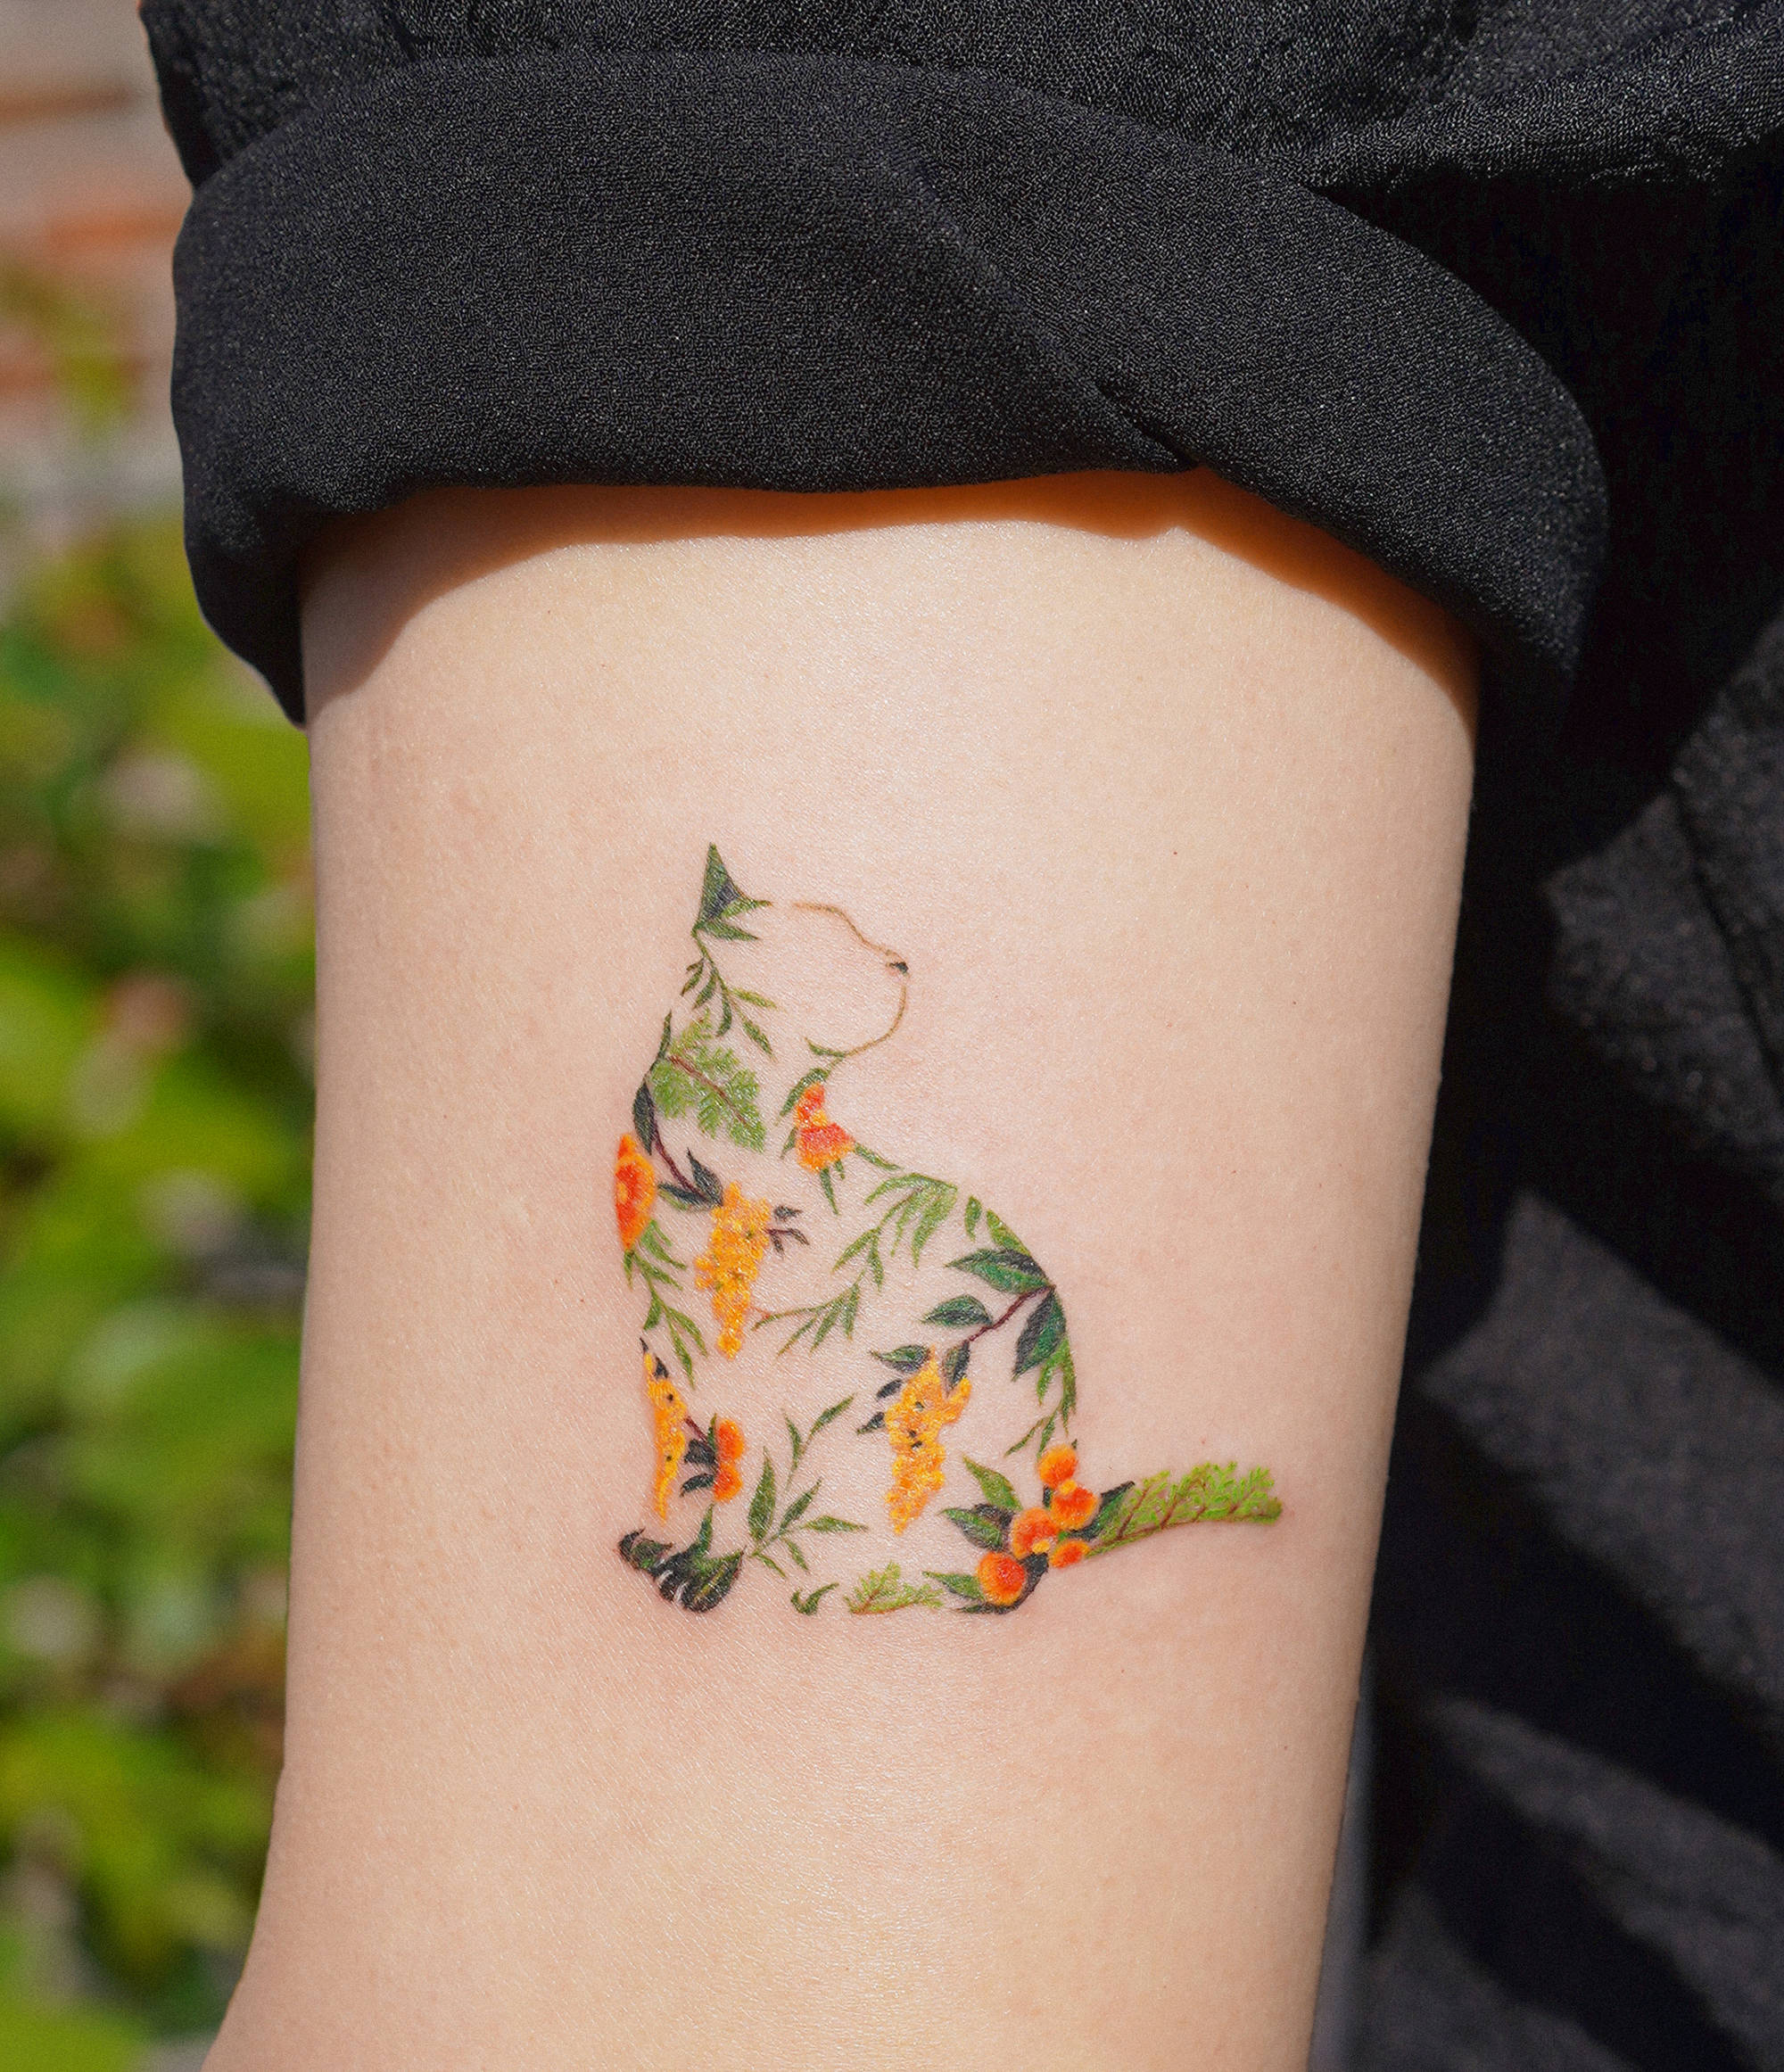 Fluffy references silhouette art, such as this cat tattoo, later in the discussion